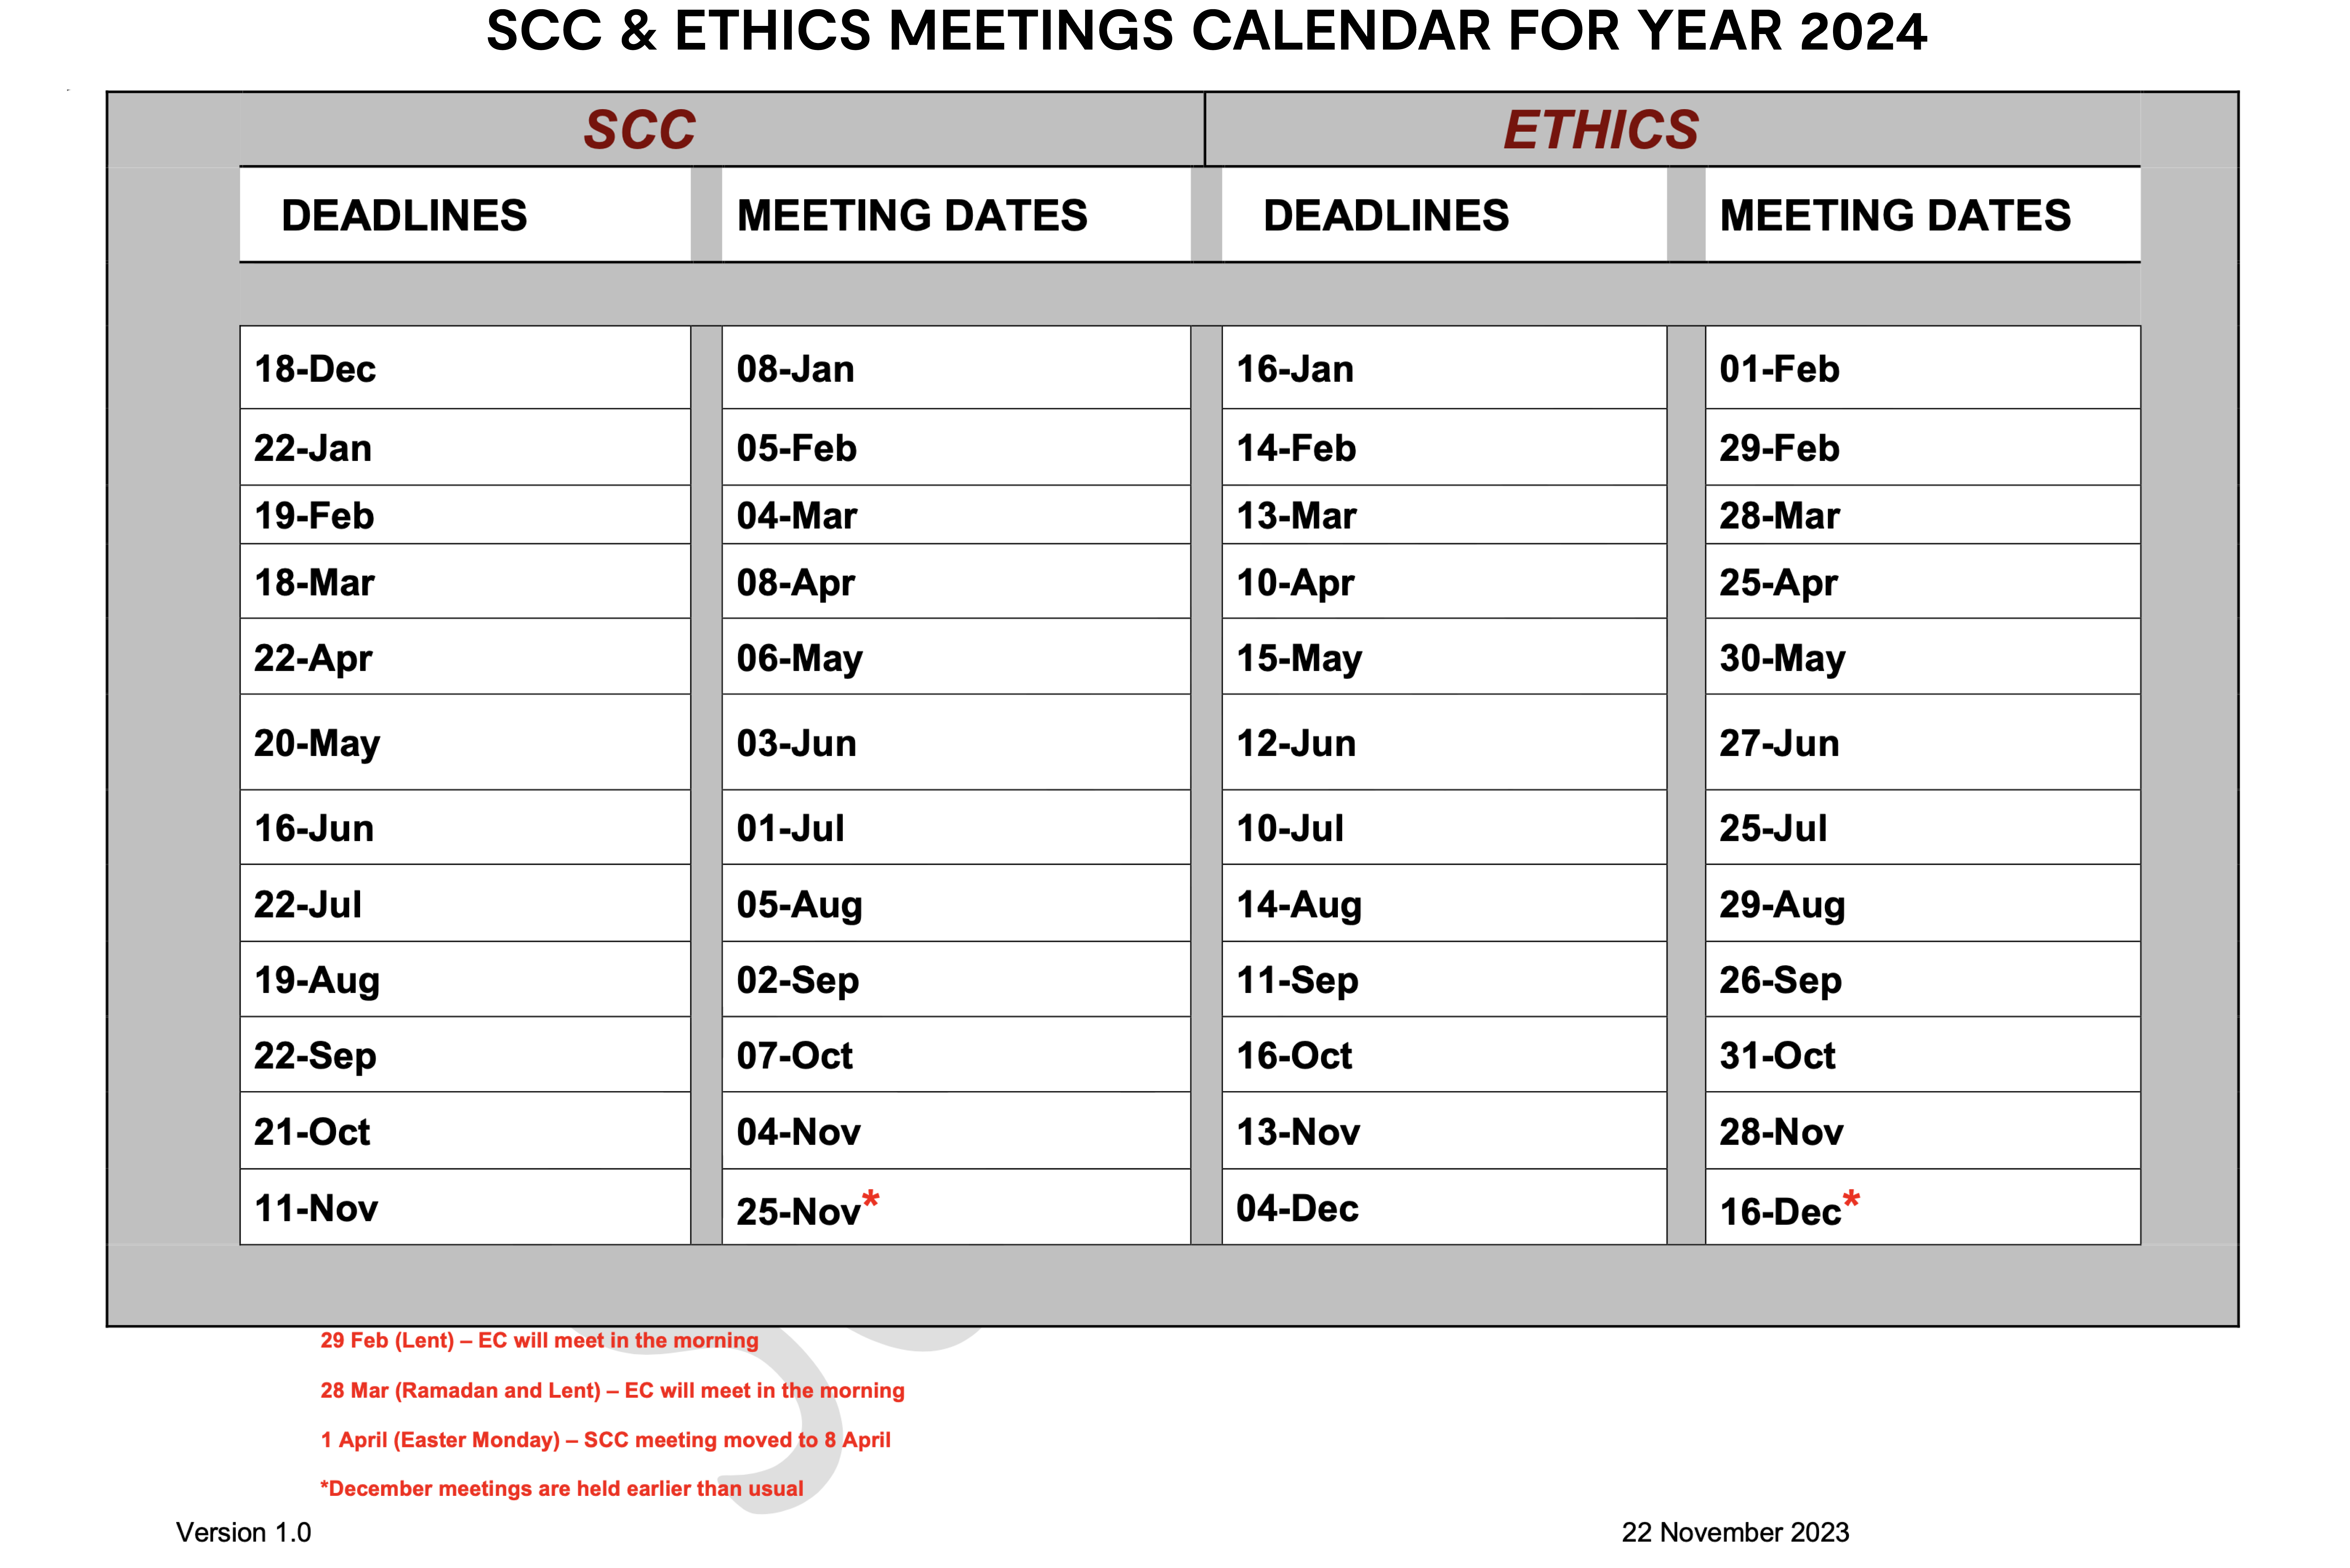 SCC & ETHICS MEETINGS CALENDAR FOR YEAR 2024